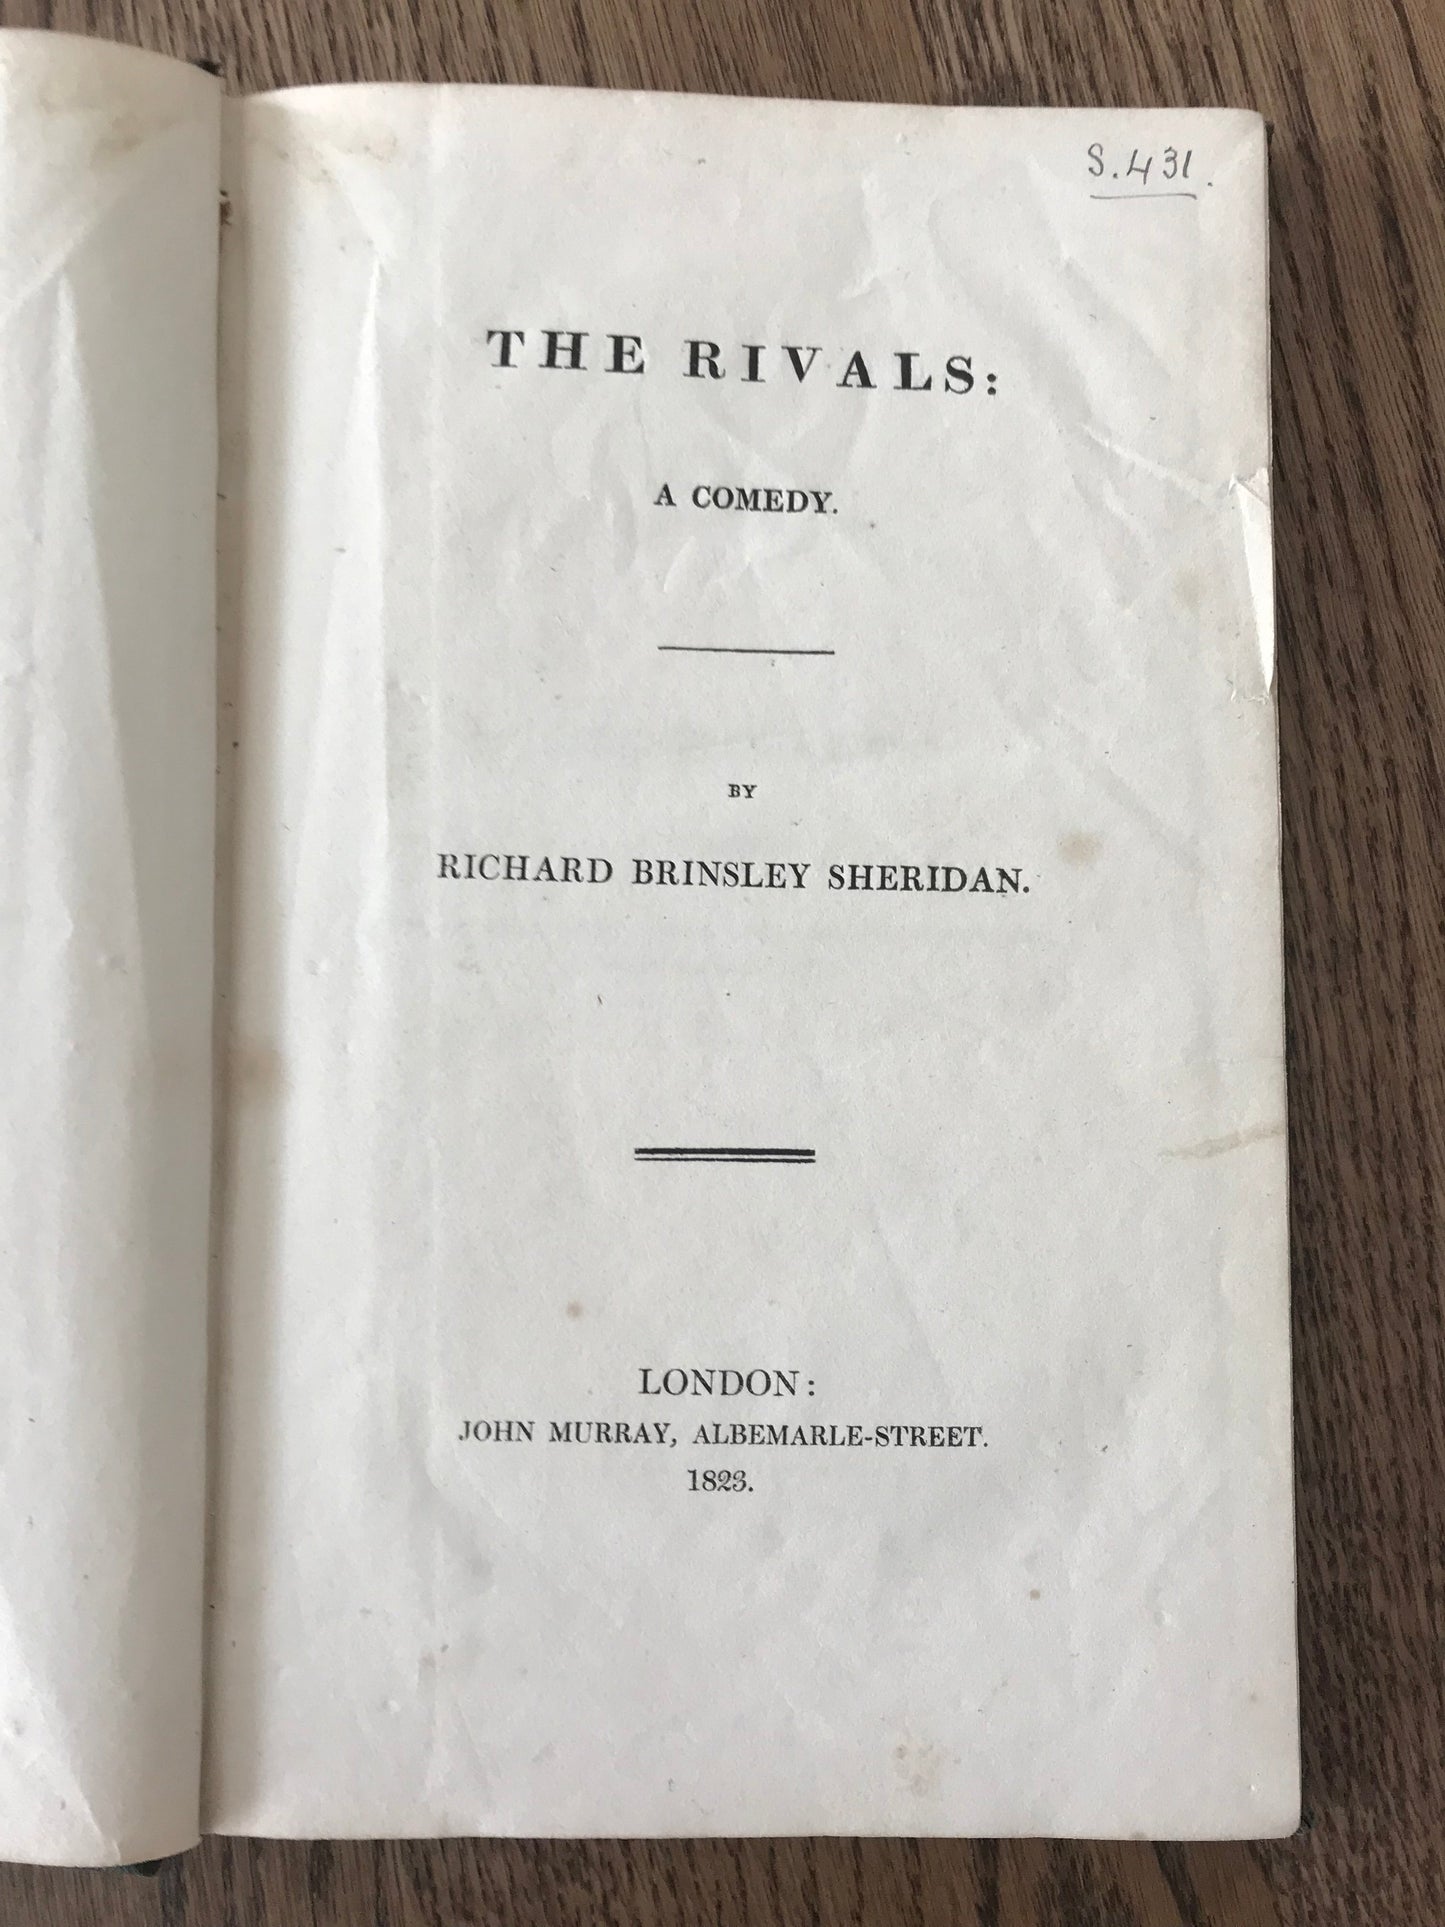 THE RIVALS : A COMEDY - RICHARD BRINSLEY SHERIDAN BooksCardsNBikes